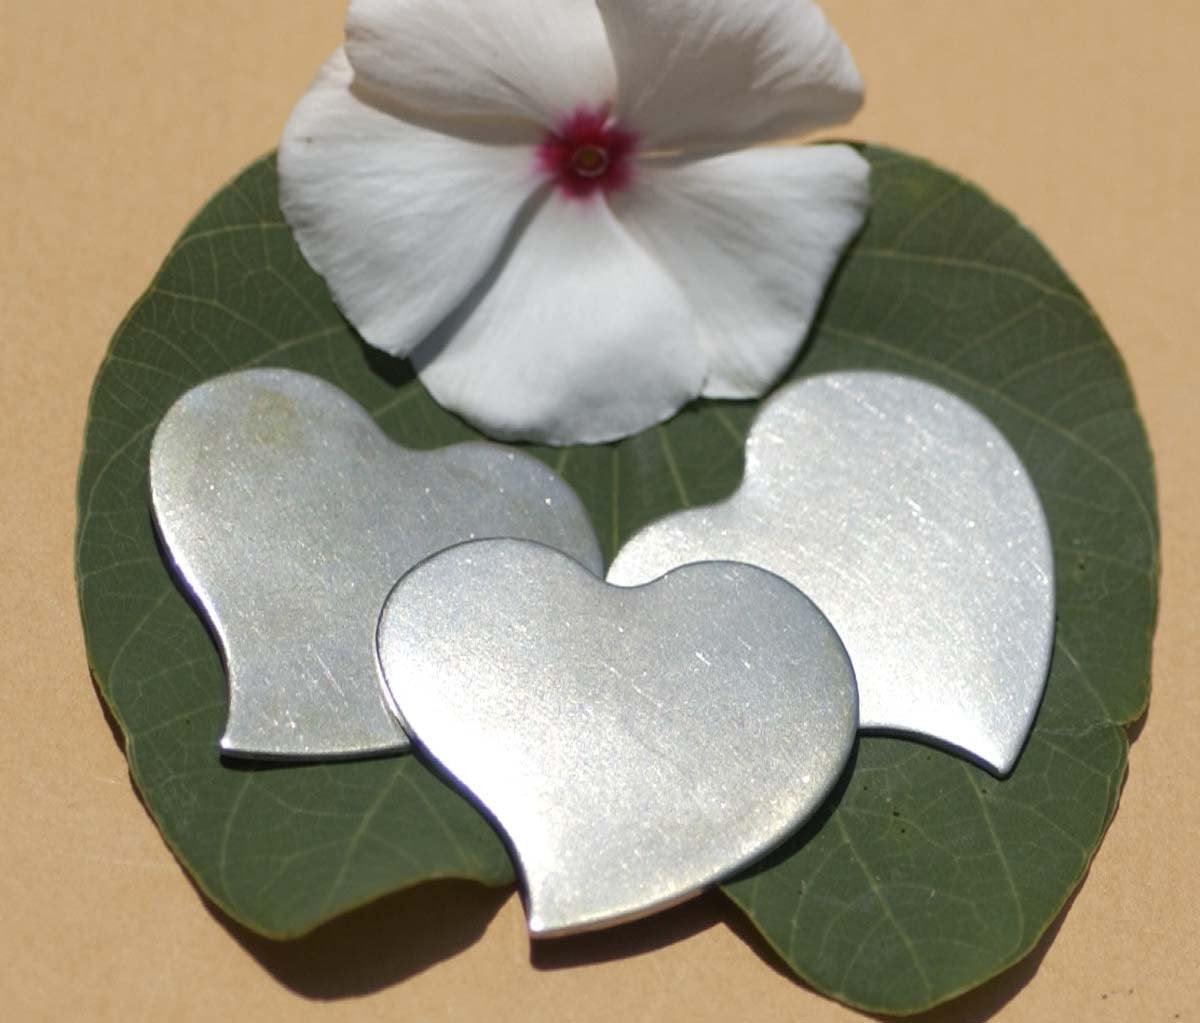 Nickel Silver Blank Heart Sweet Whimsy 30mm x 32mm Cutout for Metalworking Stamping Texturing Blanks  4 pieces